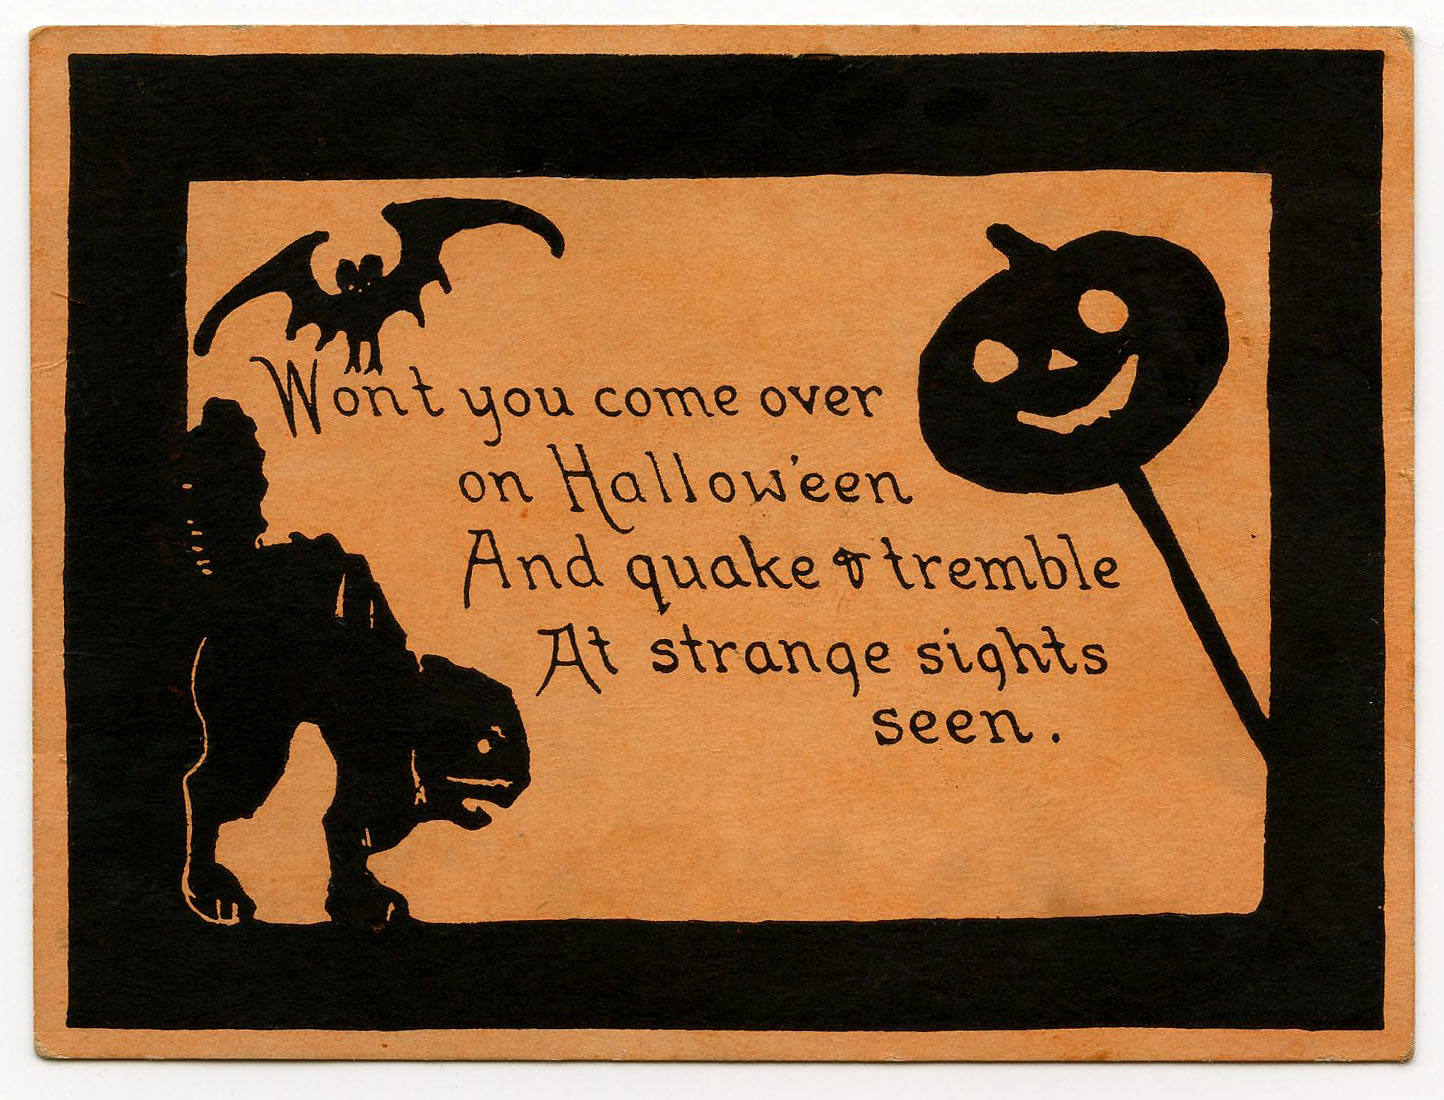 Vintage Halloween Clip Art   Cute Card Or Invitation   The Graphics    